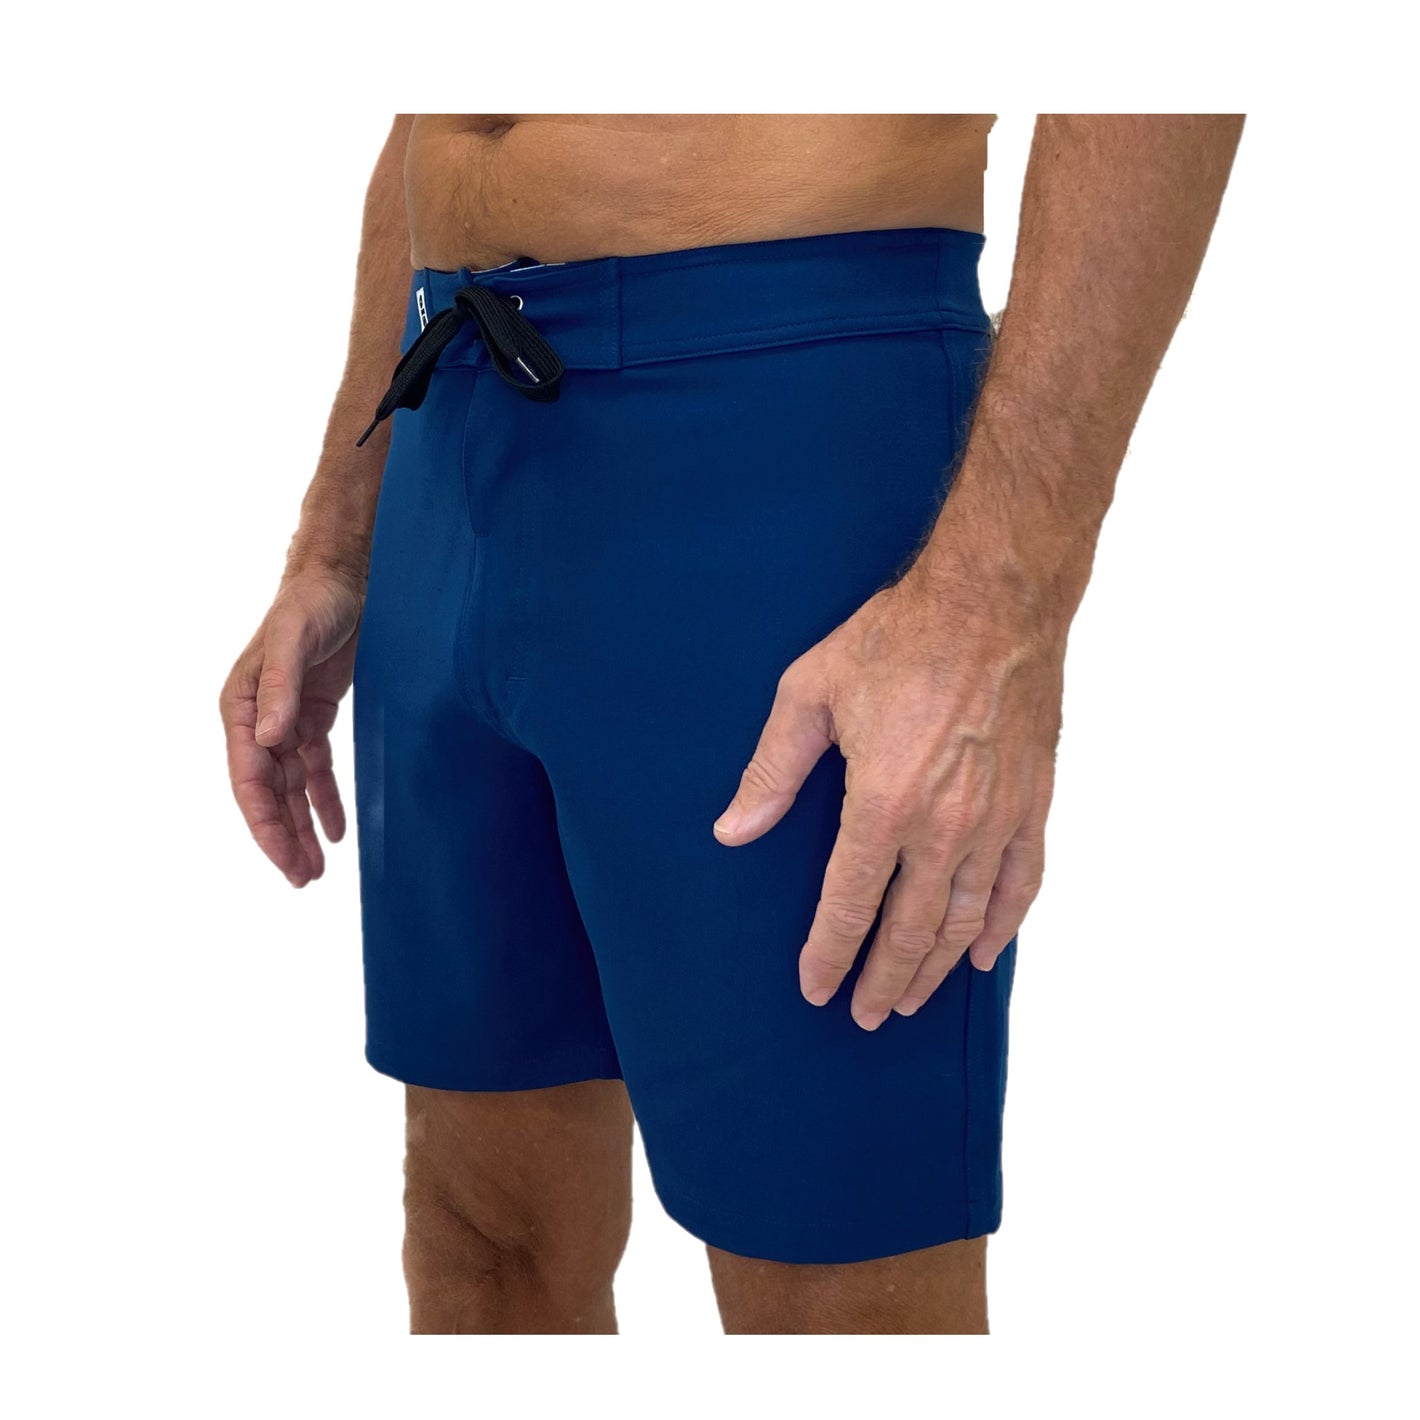 three quarter angle photo of the torso of a man wearing a boardshort